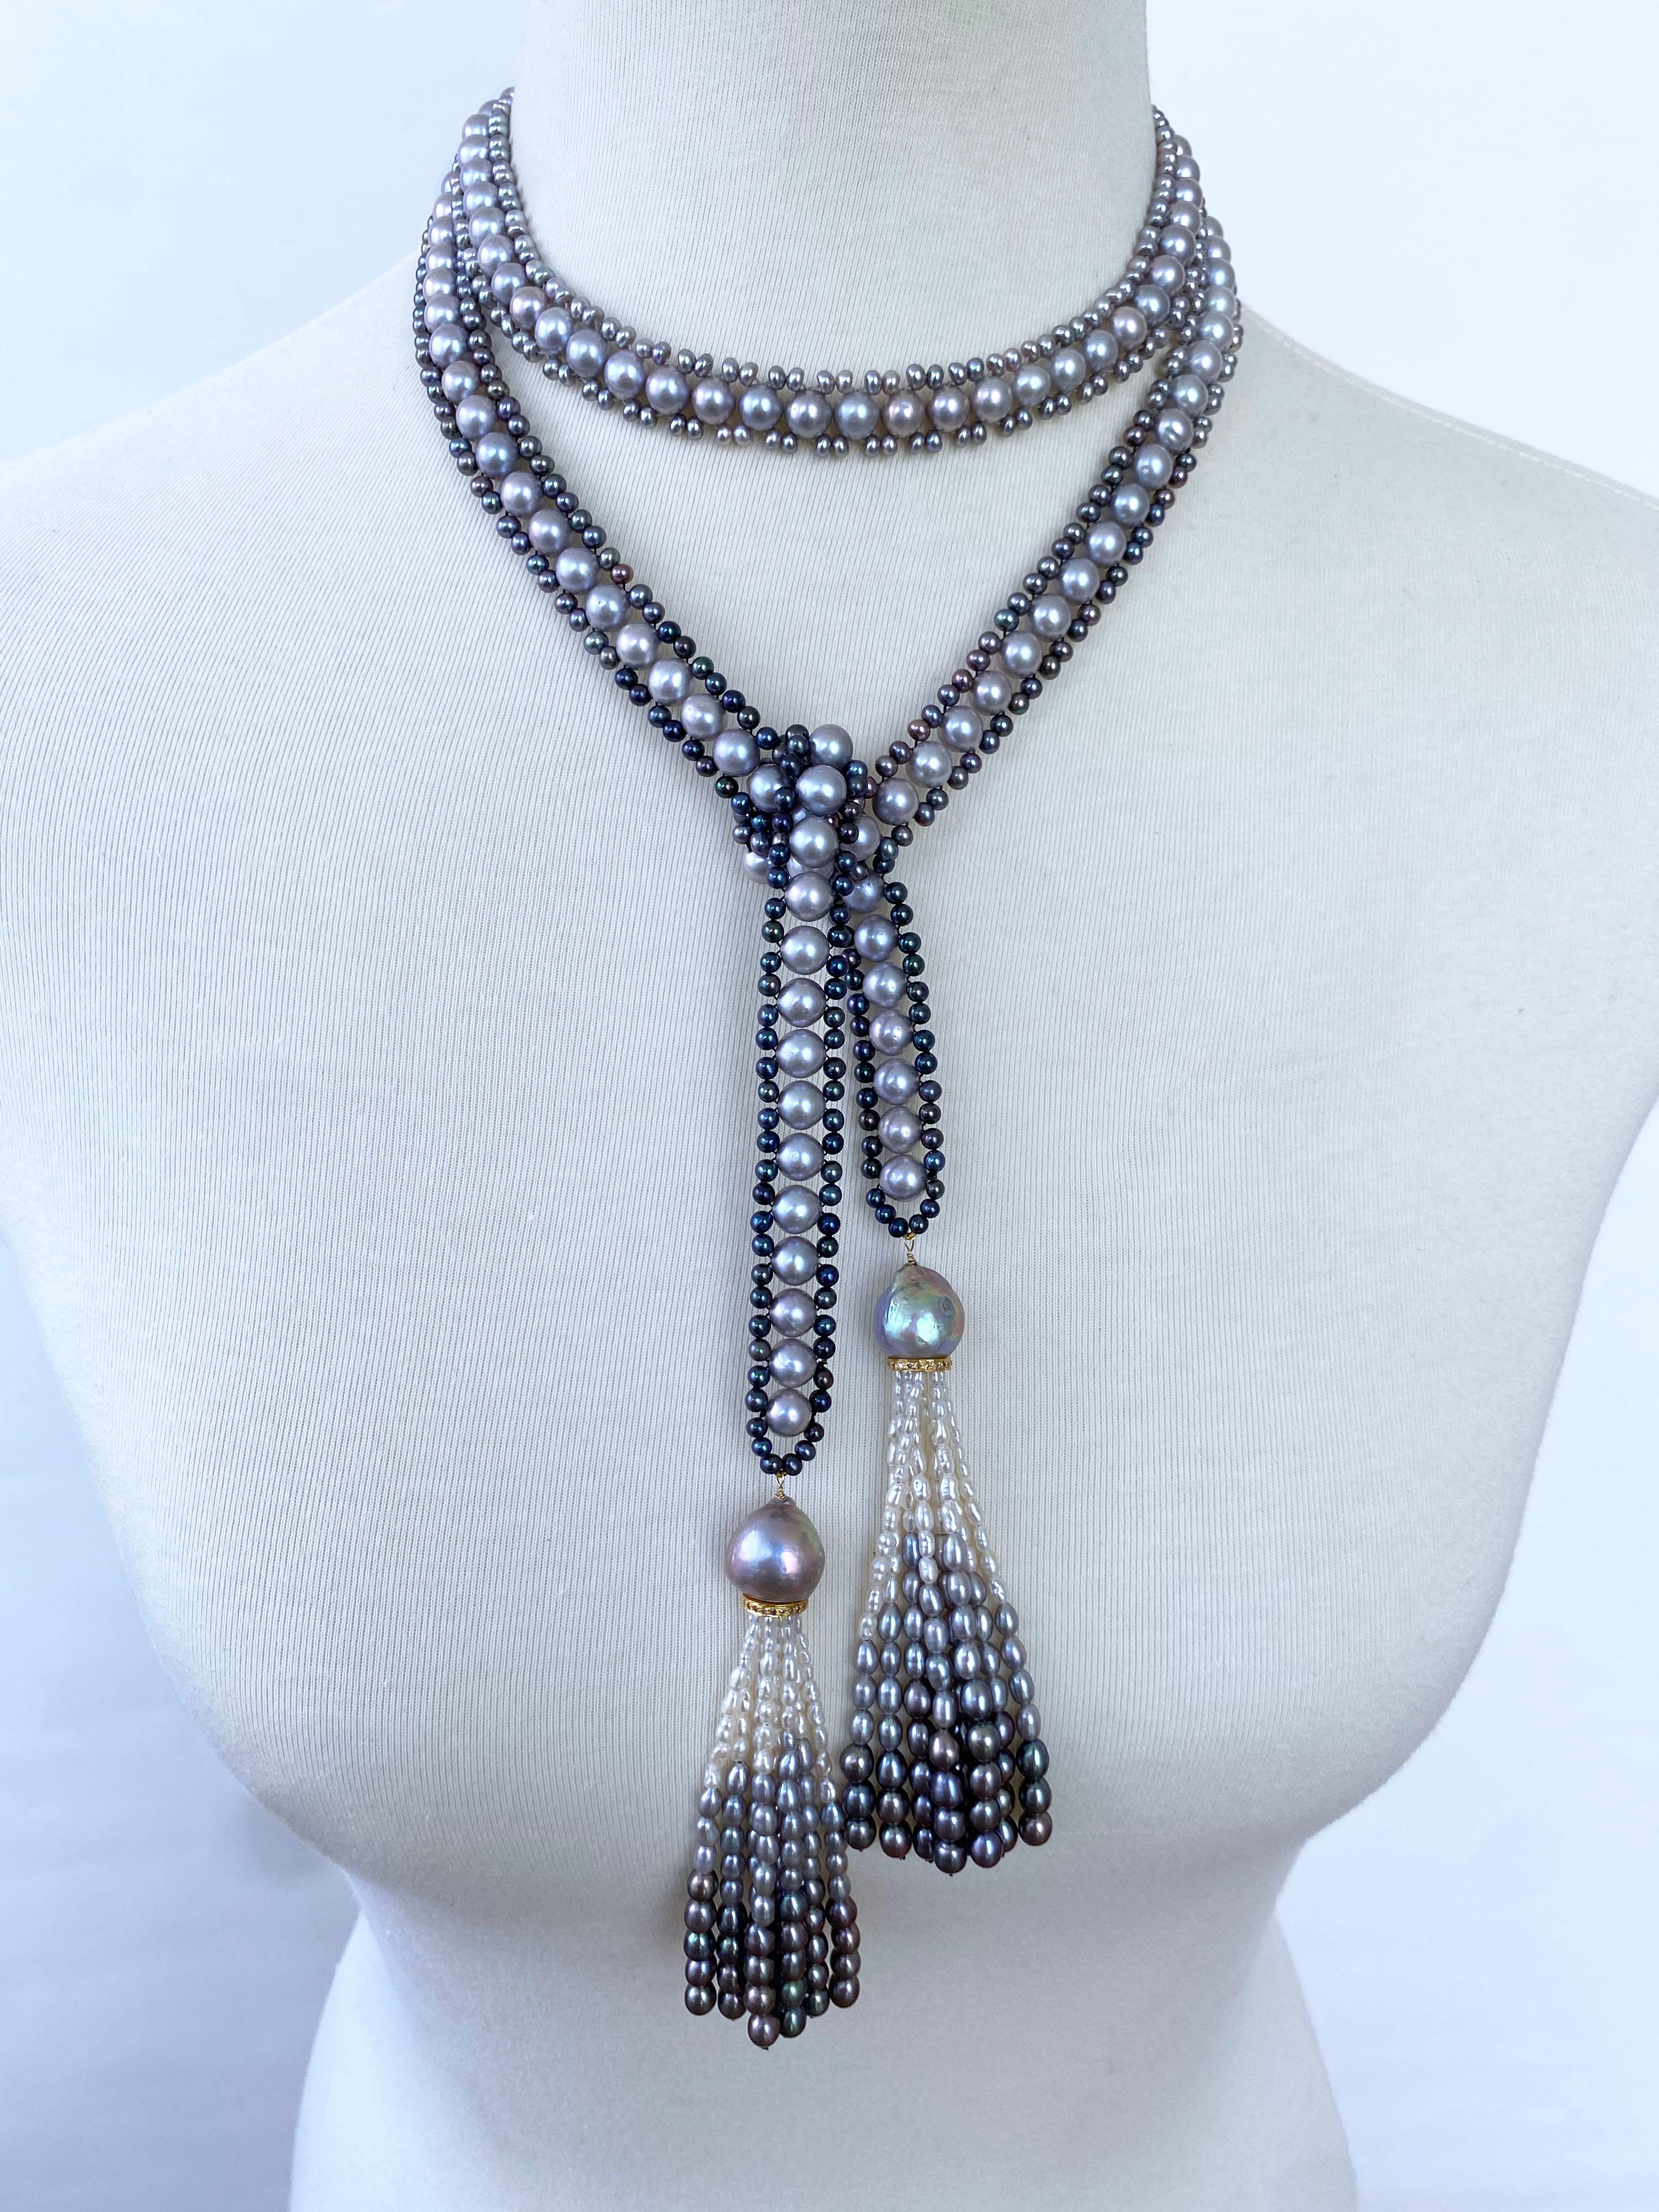 Stunning One of A Kind piece by Marina J.

This Sautoir is made with all cultured Pearls, Solid 14k Yellow Gold Wiring and Silver. Measuring 43 inch sans Tassels, this Sautoir's gorgeous Pearls all display multi colored iridescent luster that give a